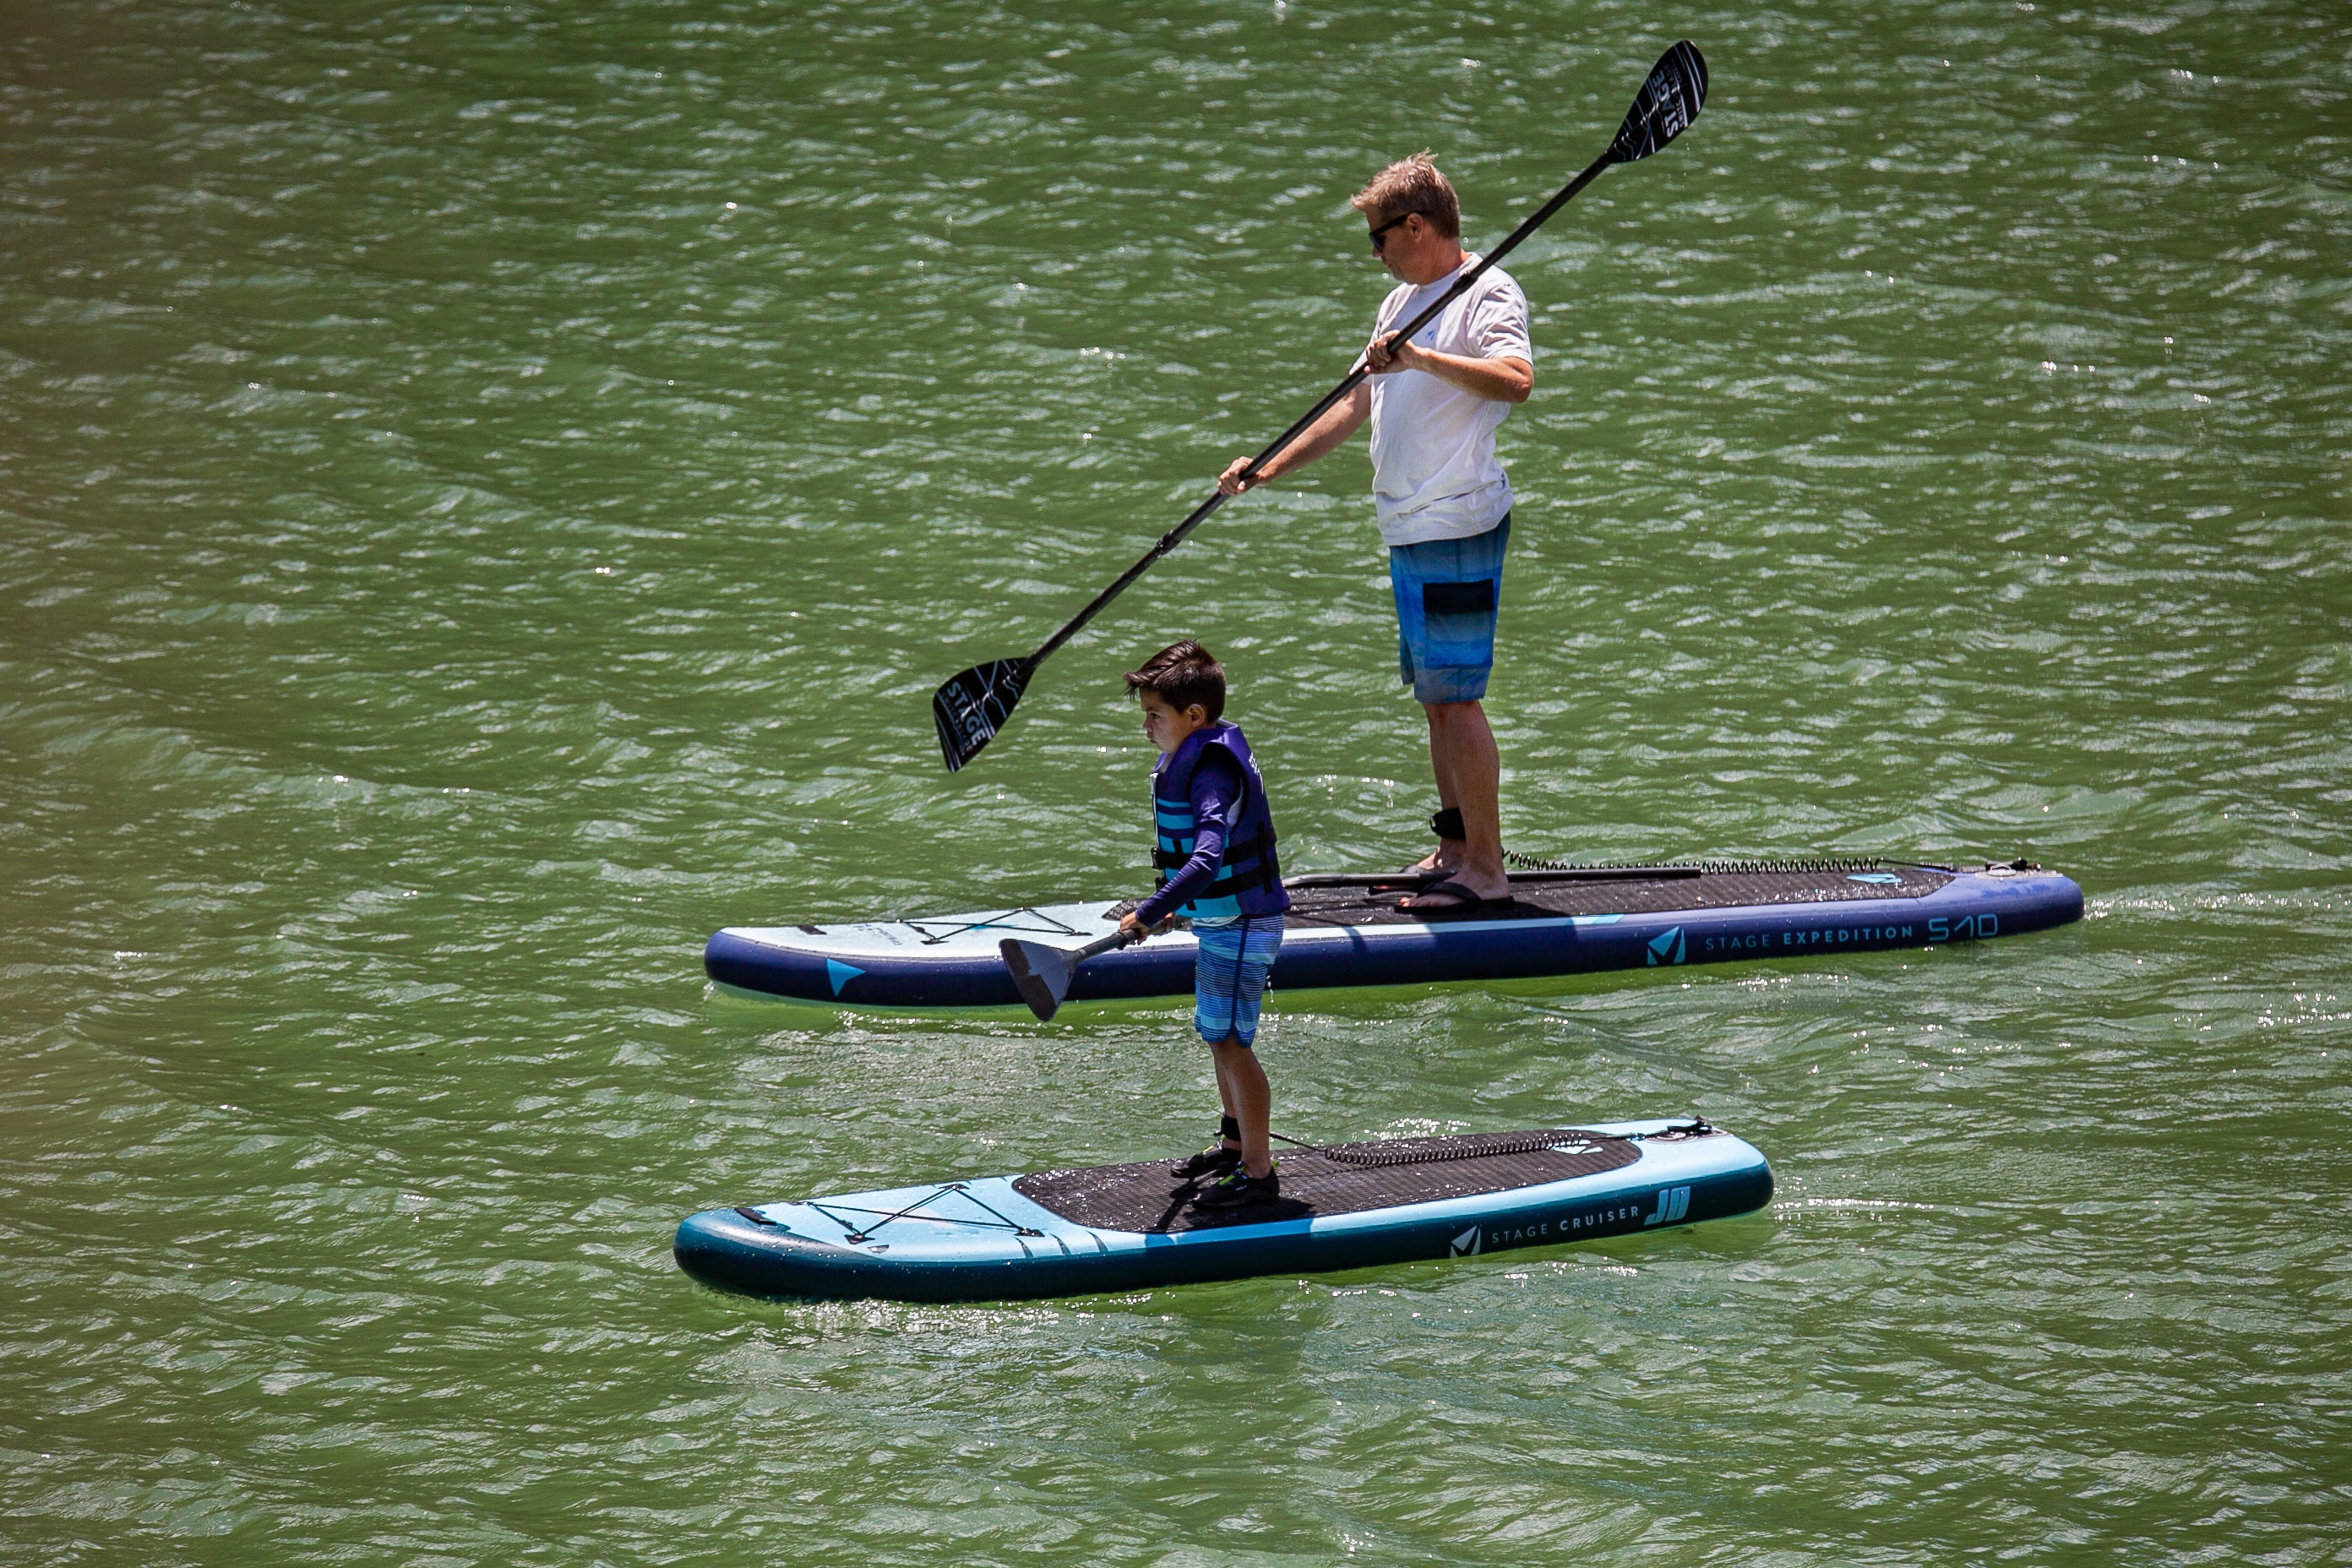 The J8 Junior Cruiser is the perfect SUP board the little adventurers! The smaller dimensions offer a more manageable and lightweight design to make sure your little ones are safe and having fun on the water. The J8 Cruiser is made with super durable and long lasting military grade 2-ply PVC, as well as drop stitch technology which makes an inflatable just as rigid and stable as a hard board.